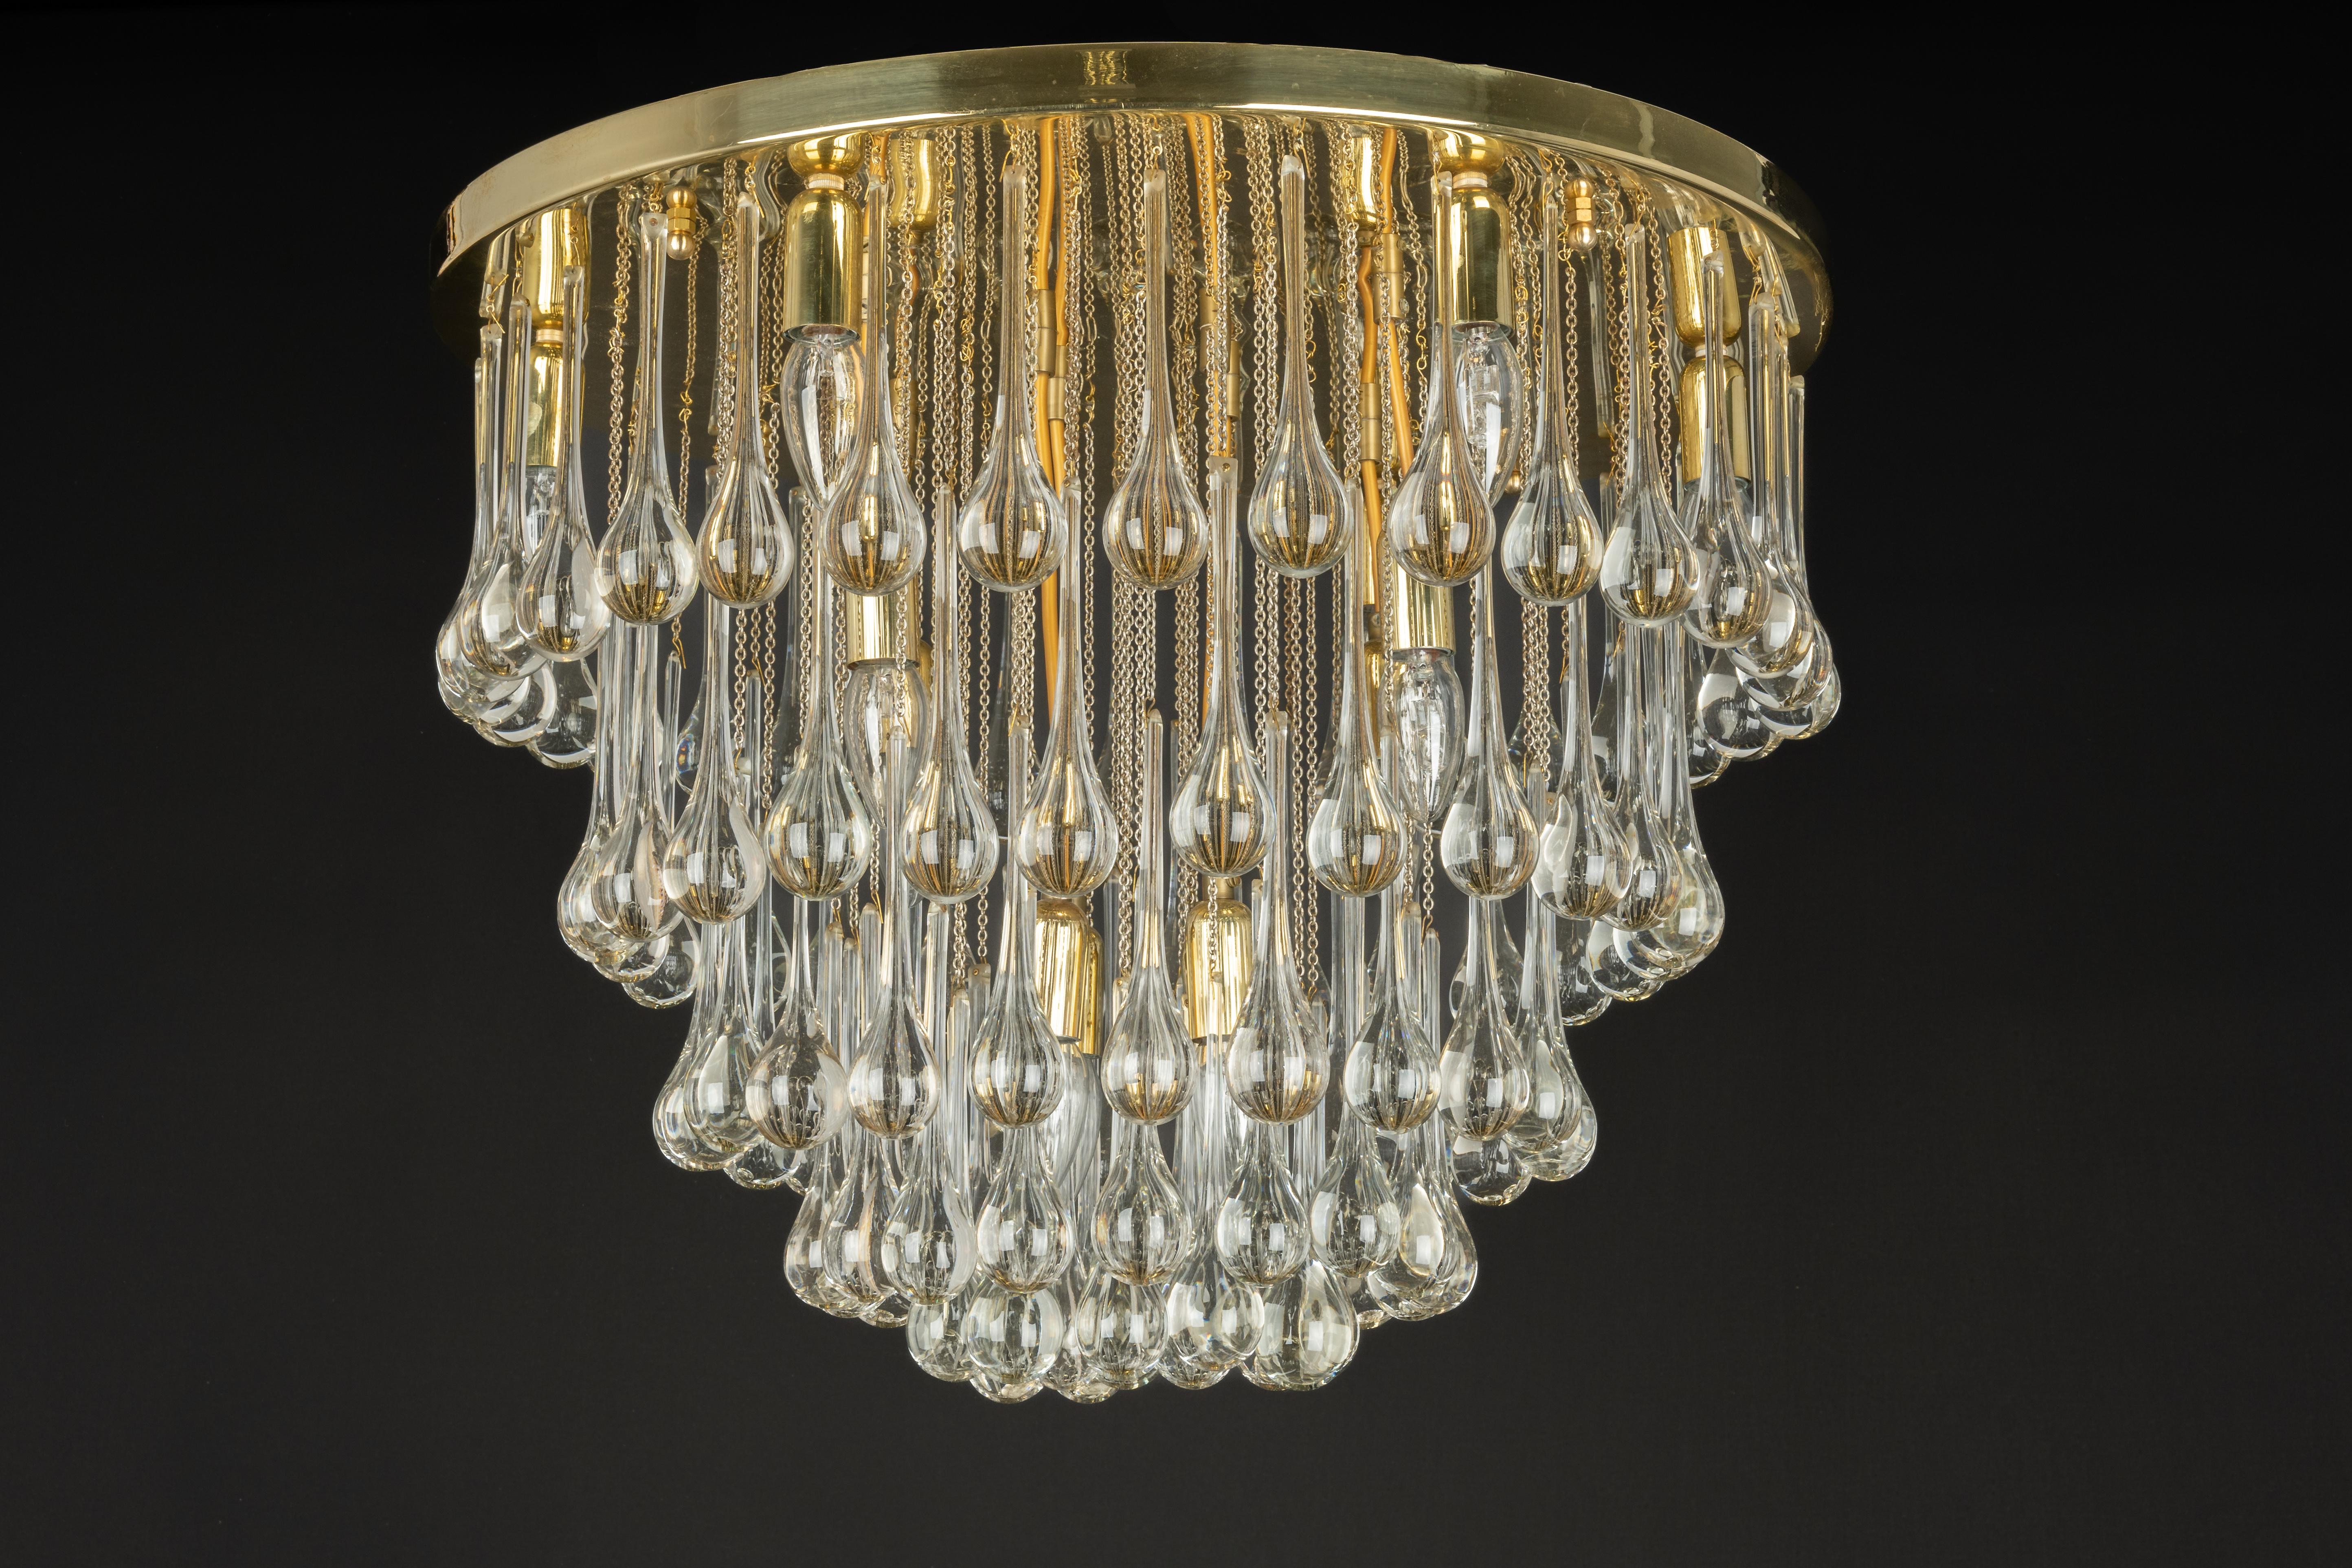 1 of 3 Large Murano Glass Tear Drop Chandelier, Christoph Palme, Germany, 1970s For Sale 8